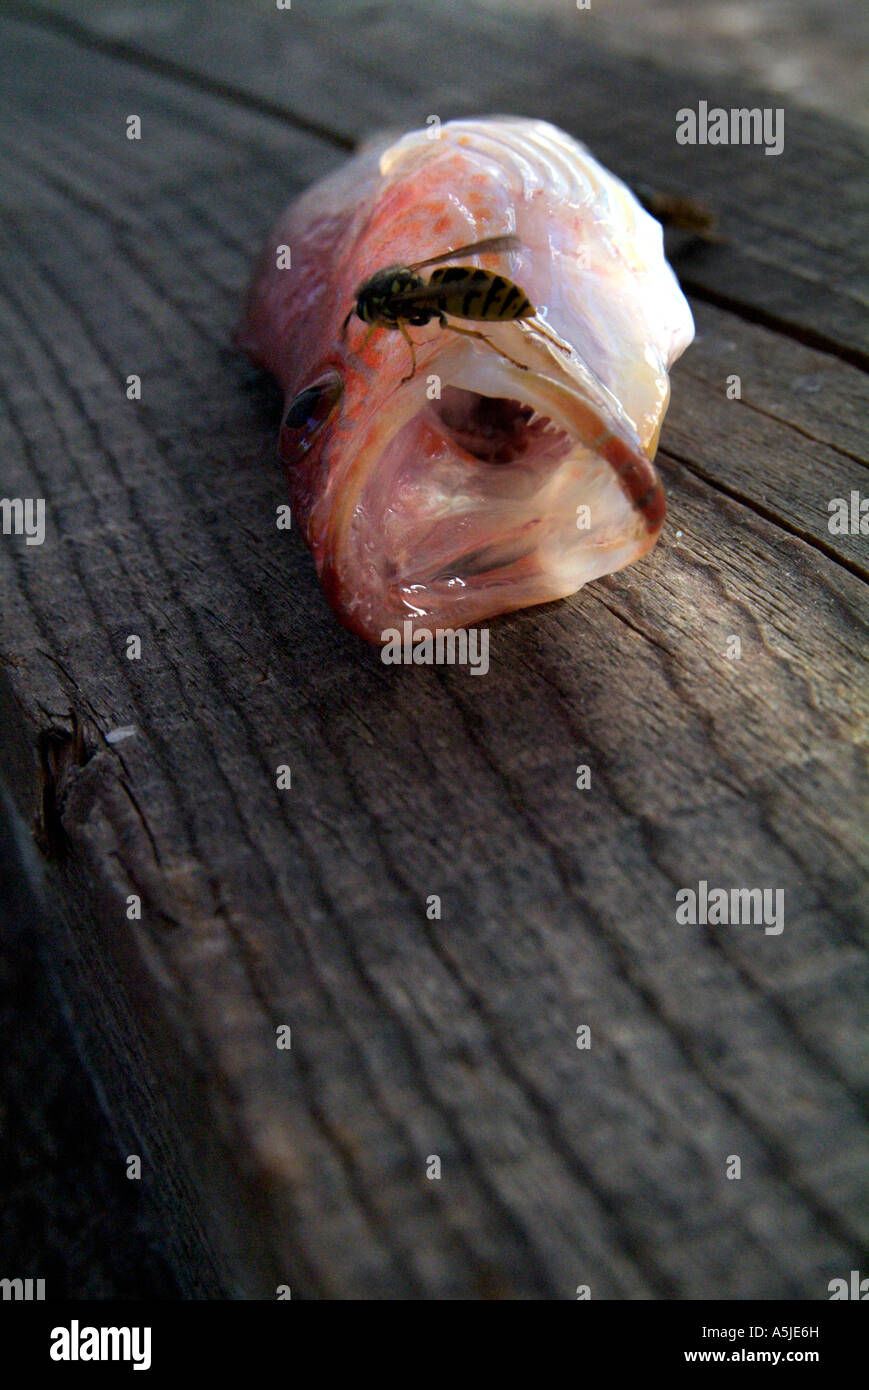 A wasp feasting on a freshly caught mediterranean perch laid out on a rough wooden table Thassos Greece September 2006 Stock Photo